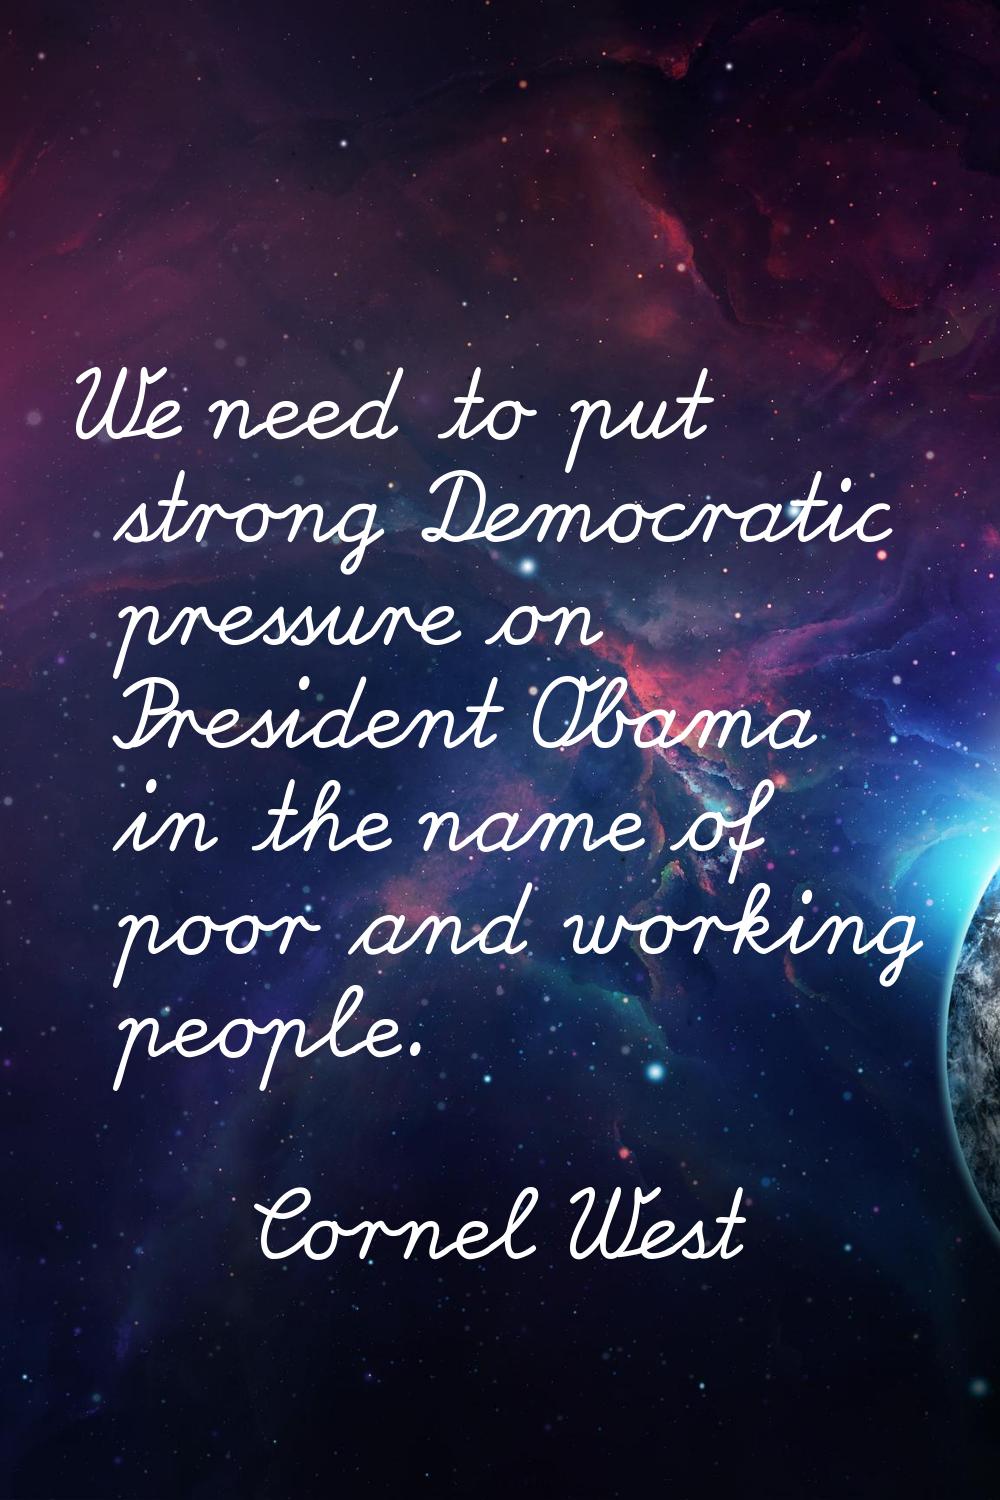 We need to put strong Democratic pressure on President Obama in the name of poor and working people